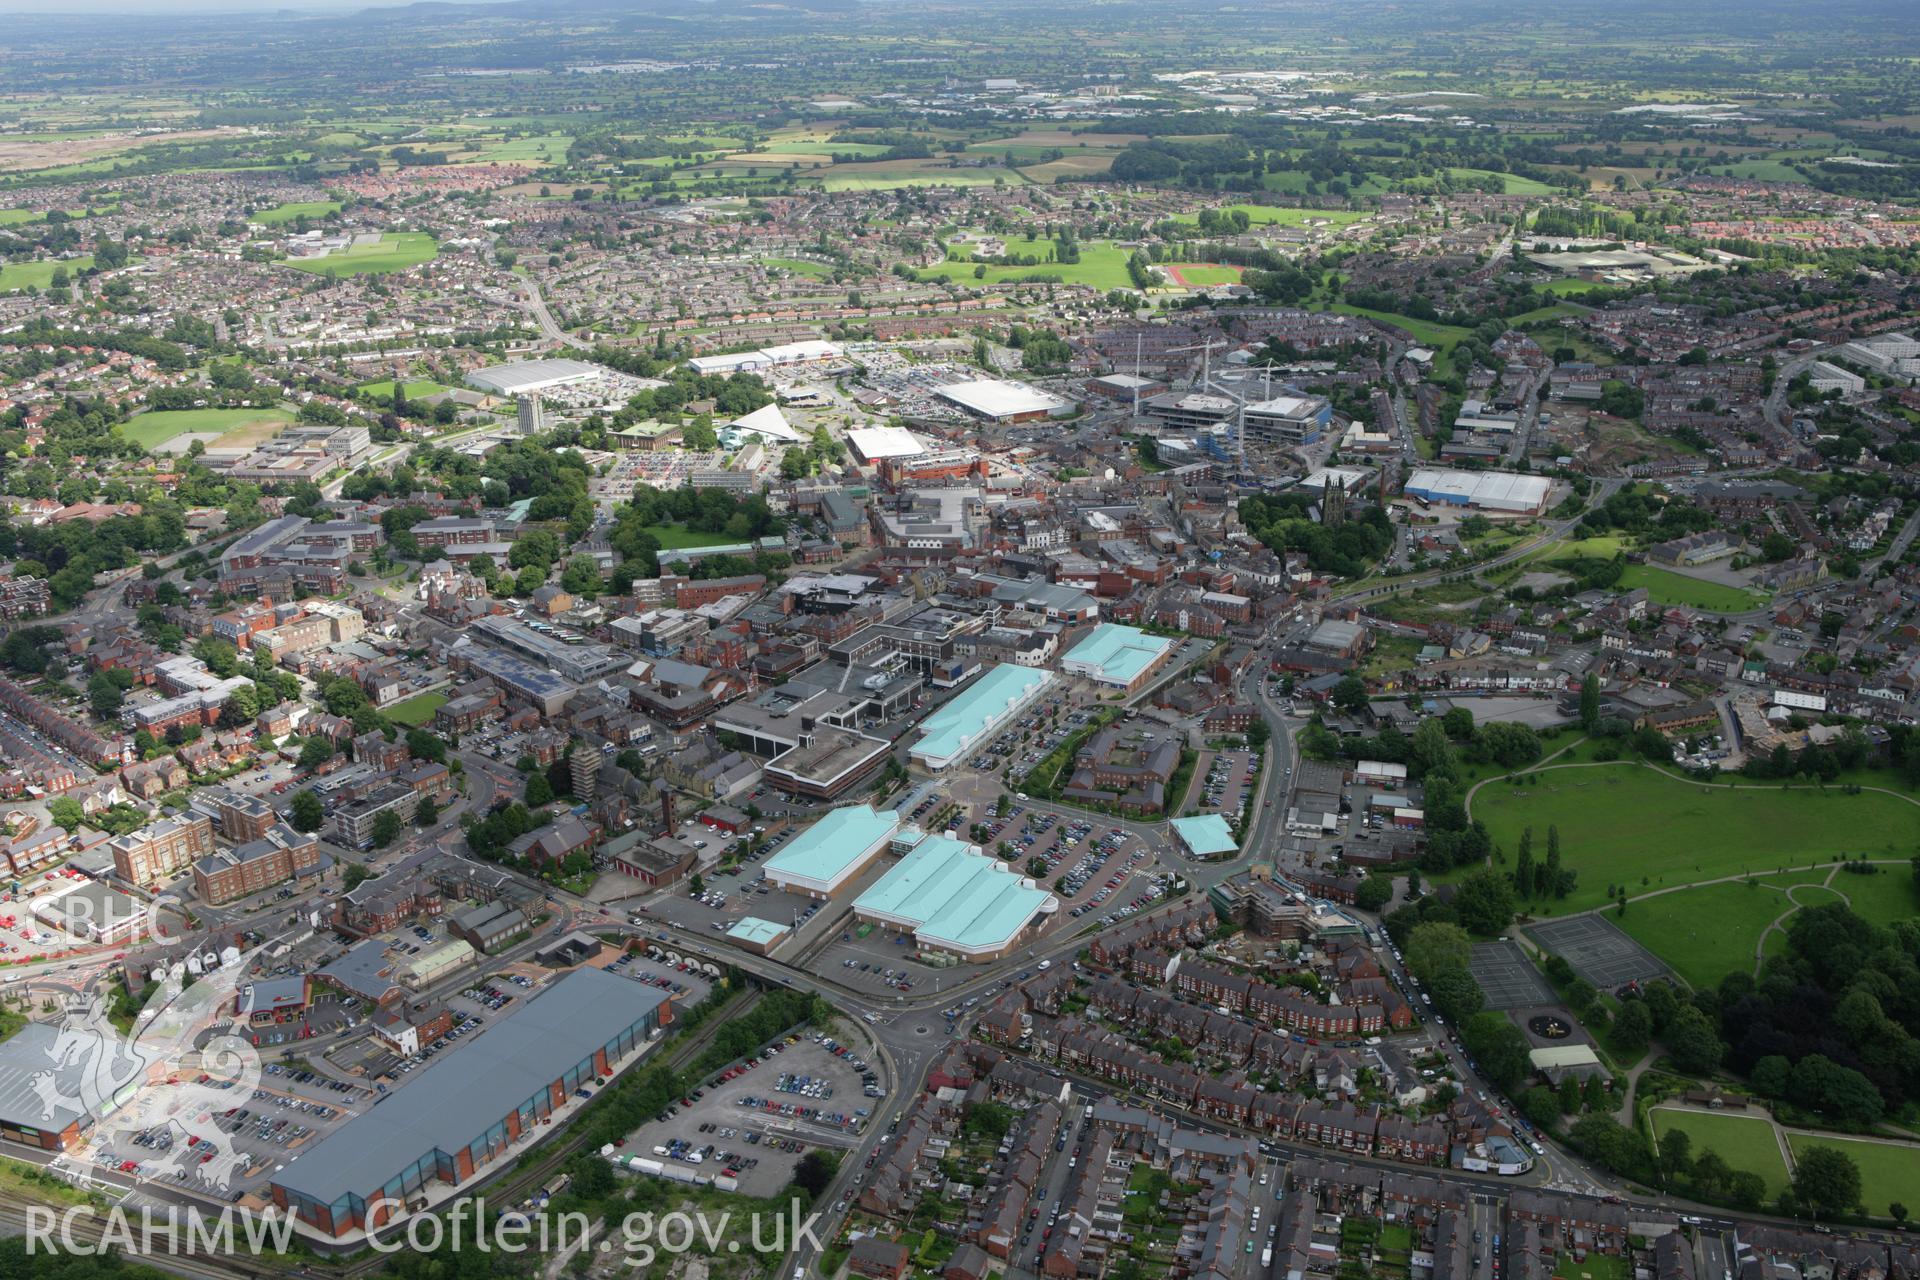 RCAHMW colour oblique aerial photograph of Wrexham. Taken on 24 July 2007 by Toby Driver